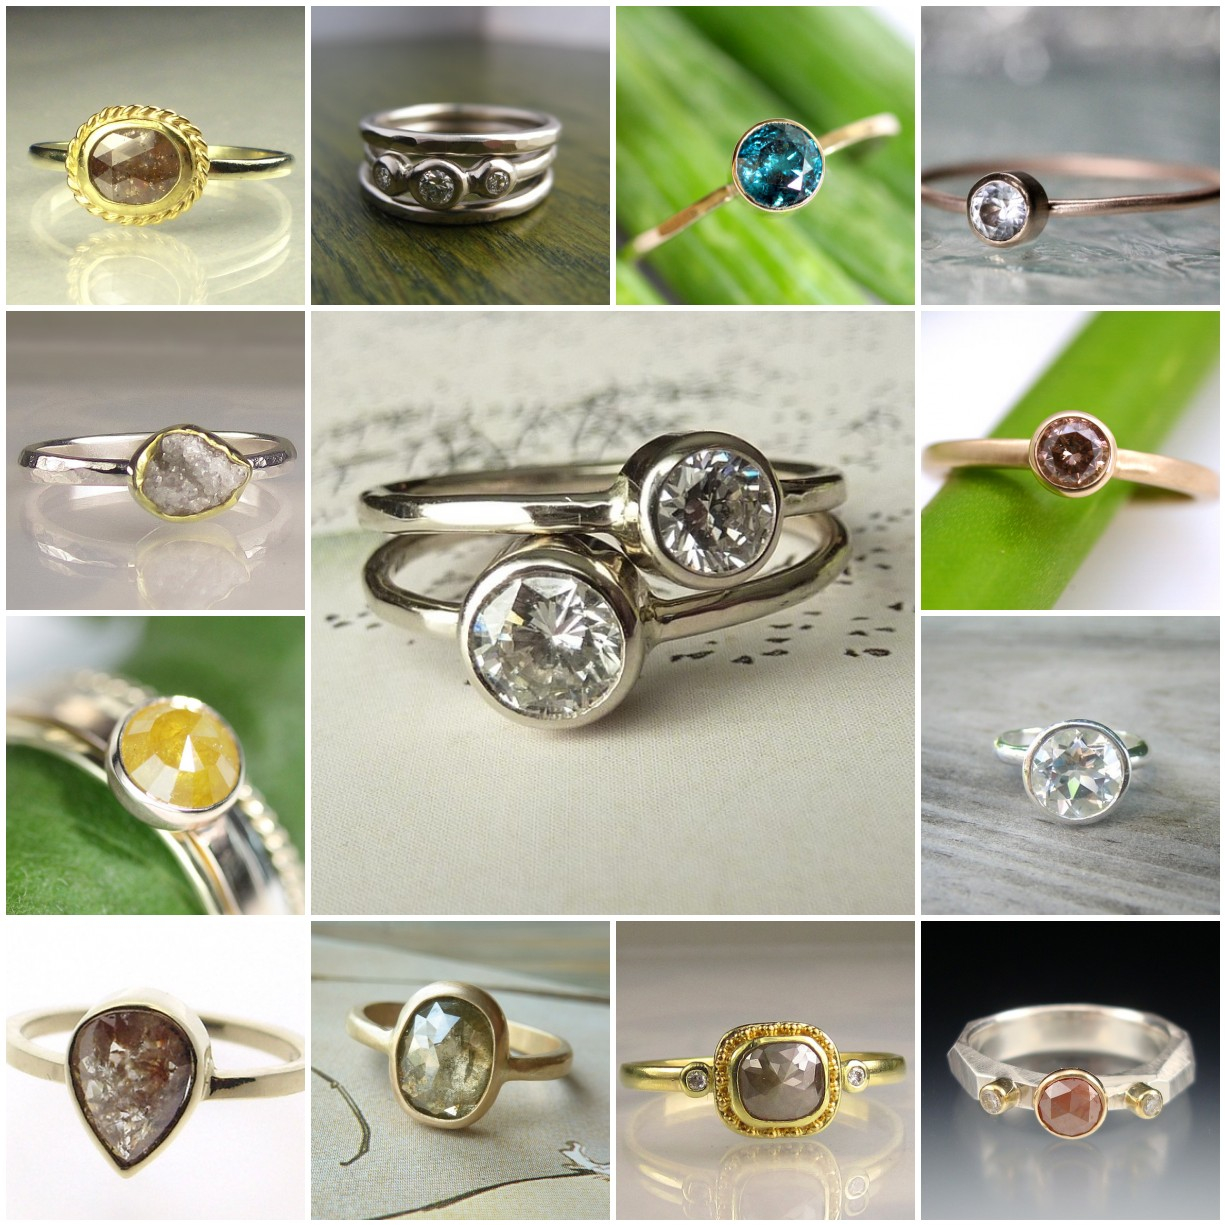 A Cape Cod Bride: Engagement Rings With A Conscience